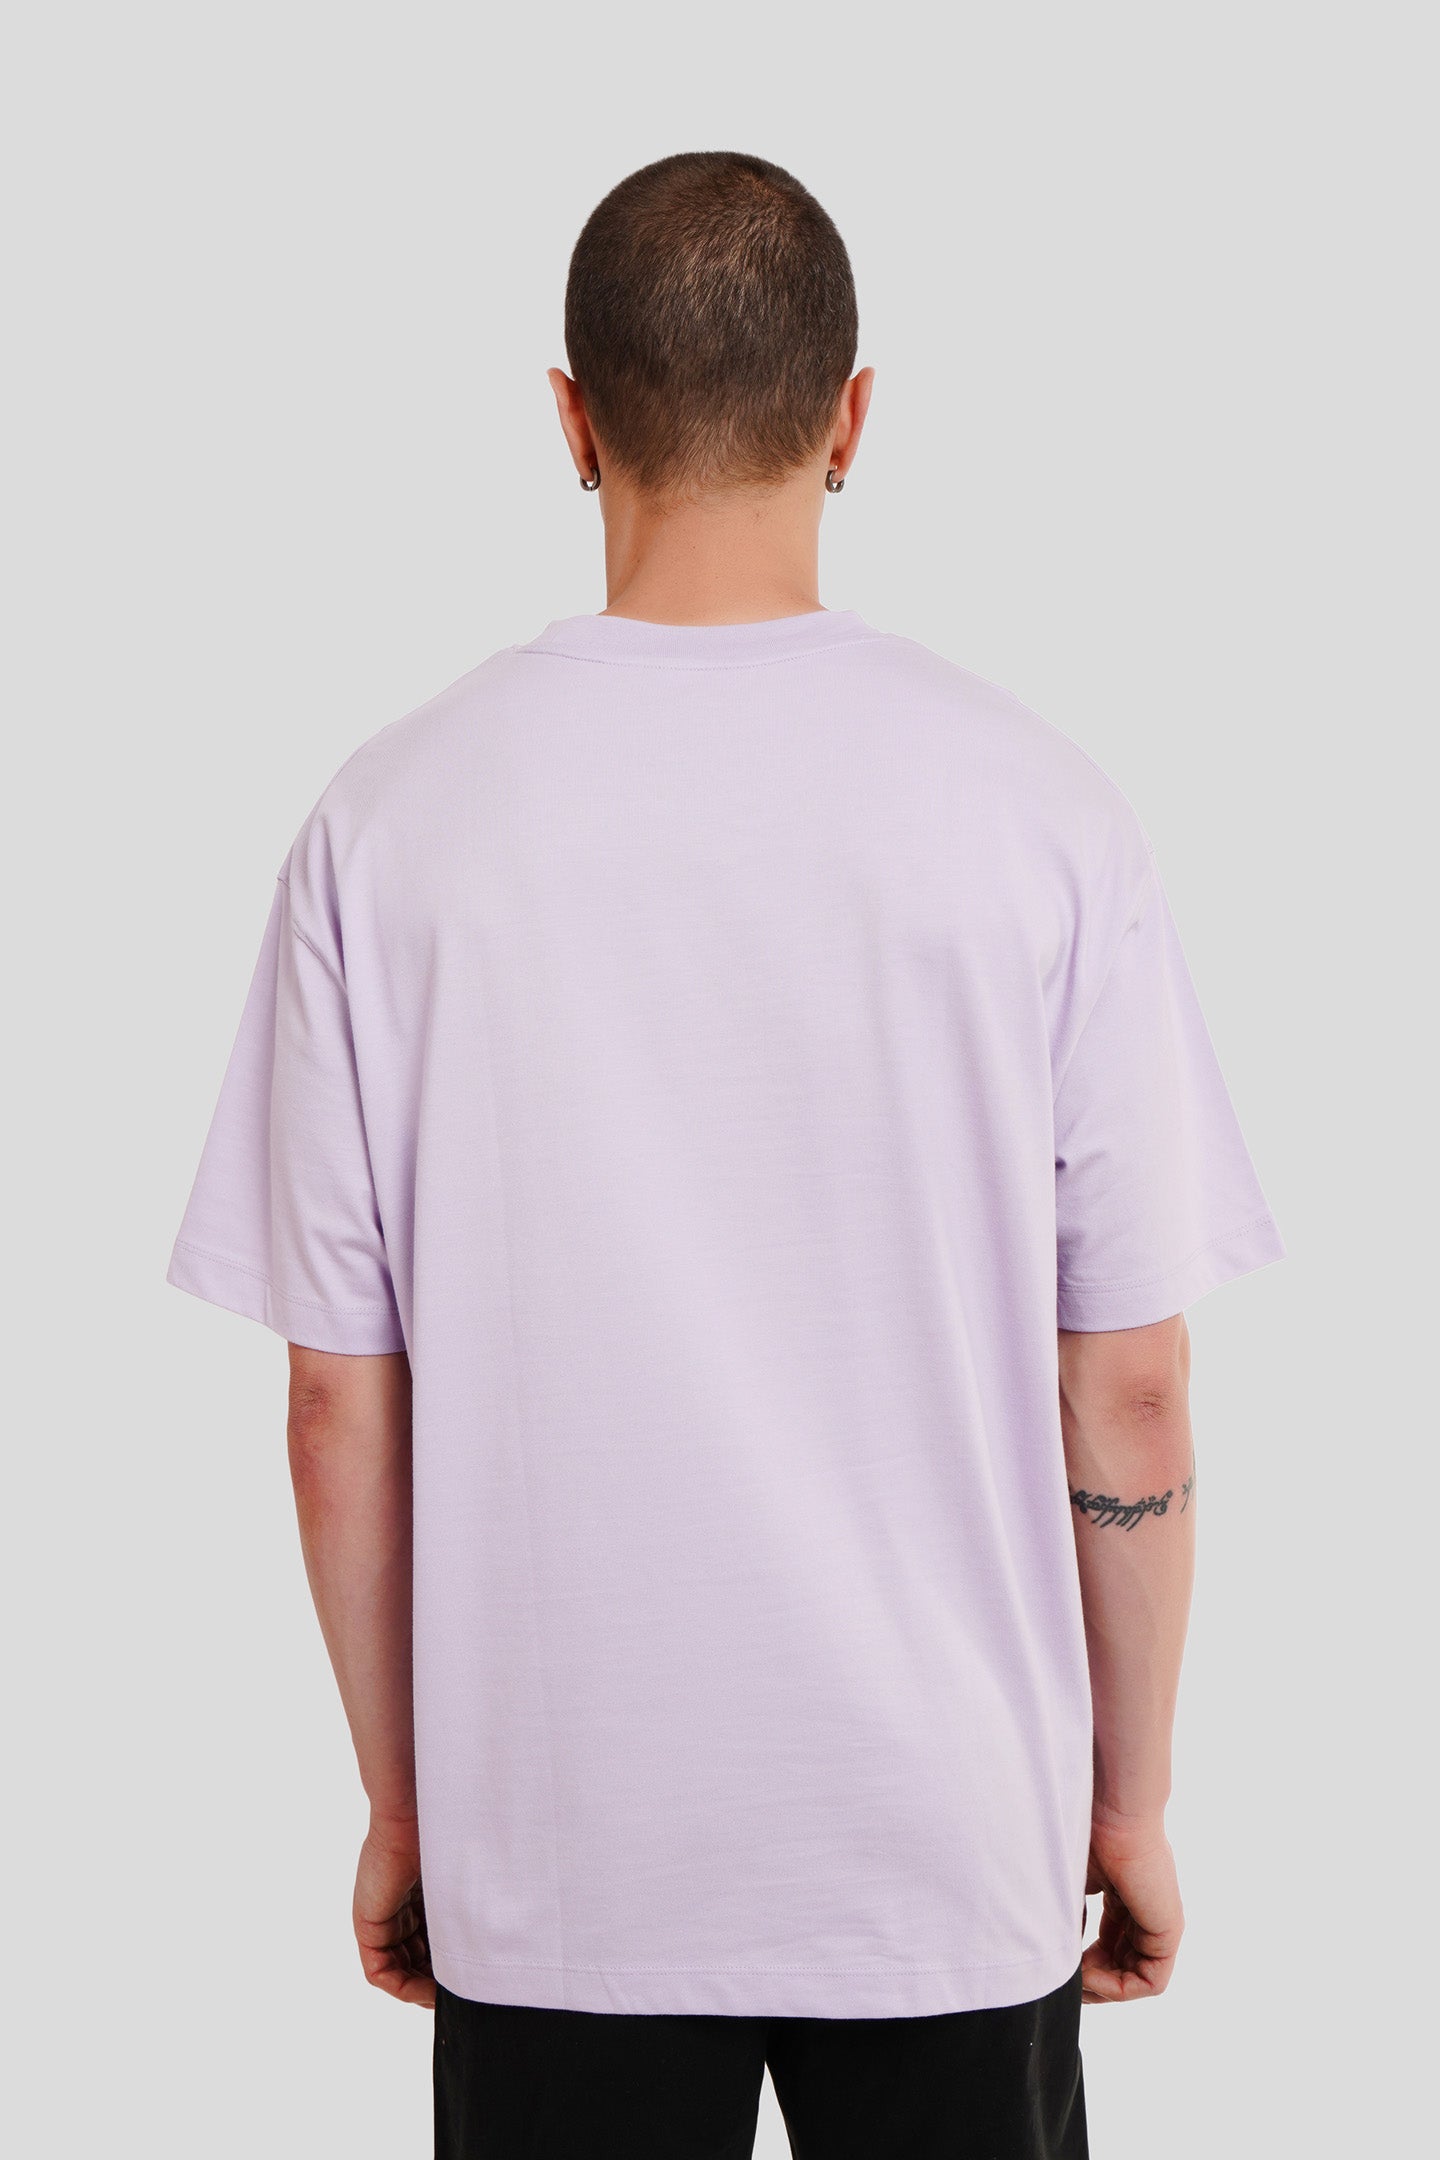 Make Things Happen Lilac Printed T Shirt Men Oversized Fit With Front Design Pic 2